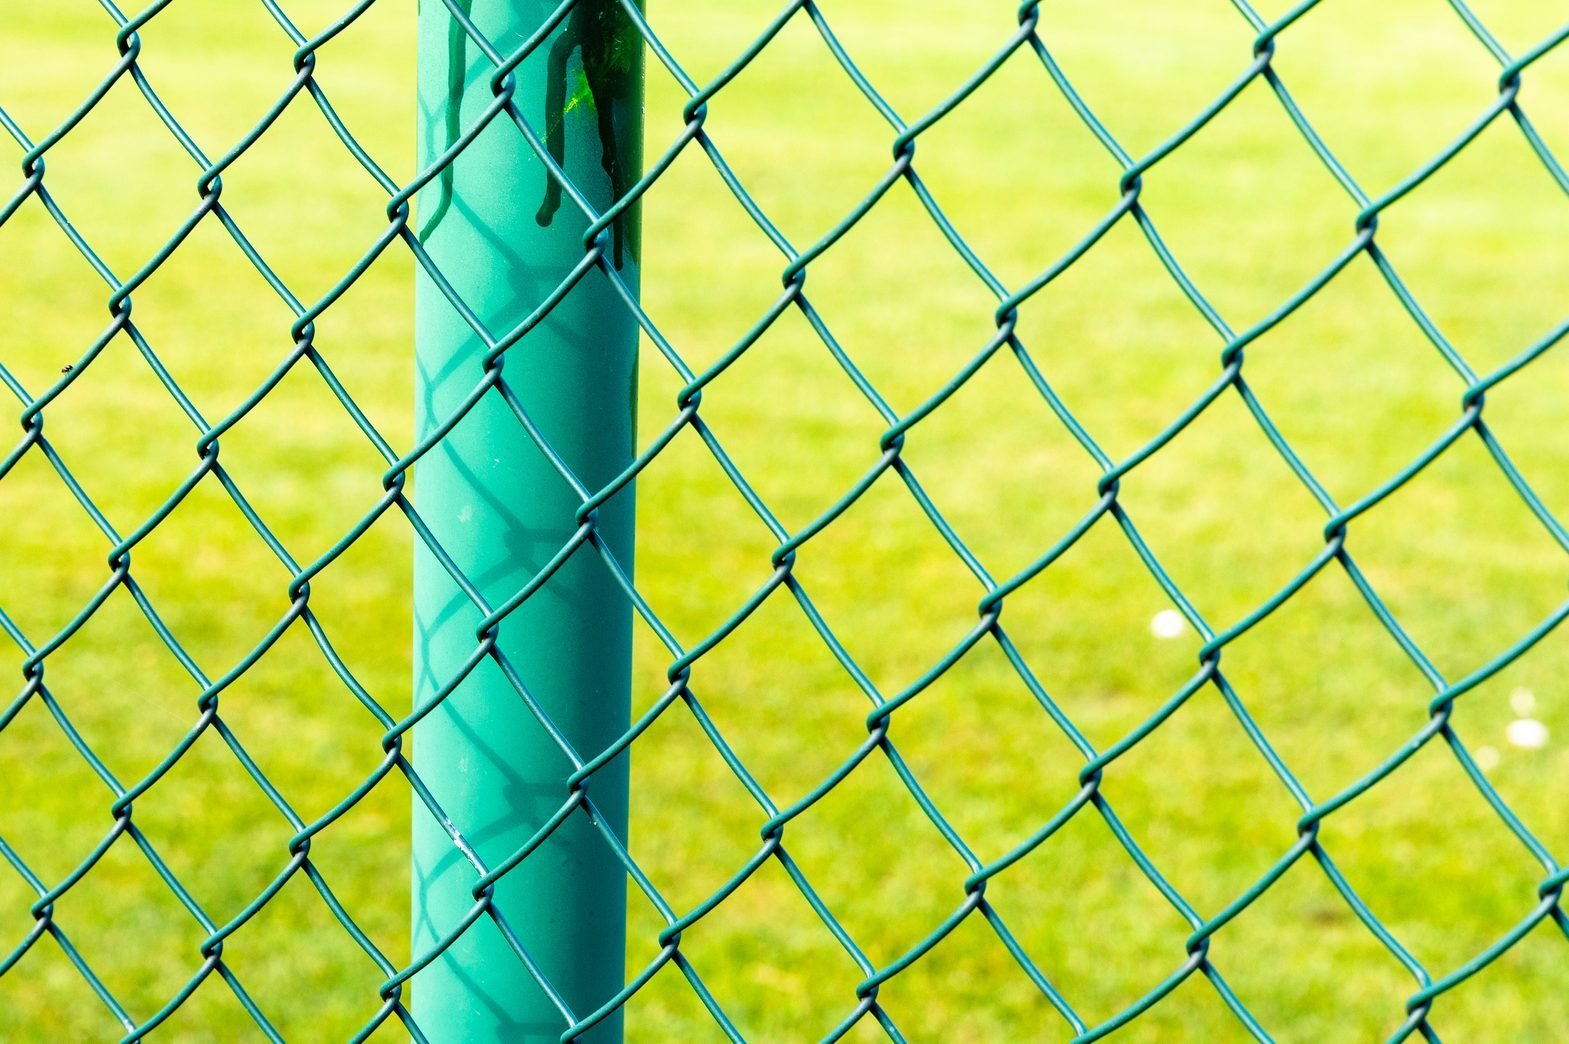 How To Paint a Chain Link Fence